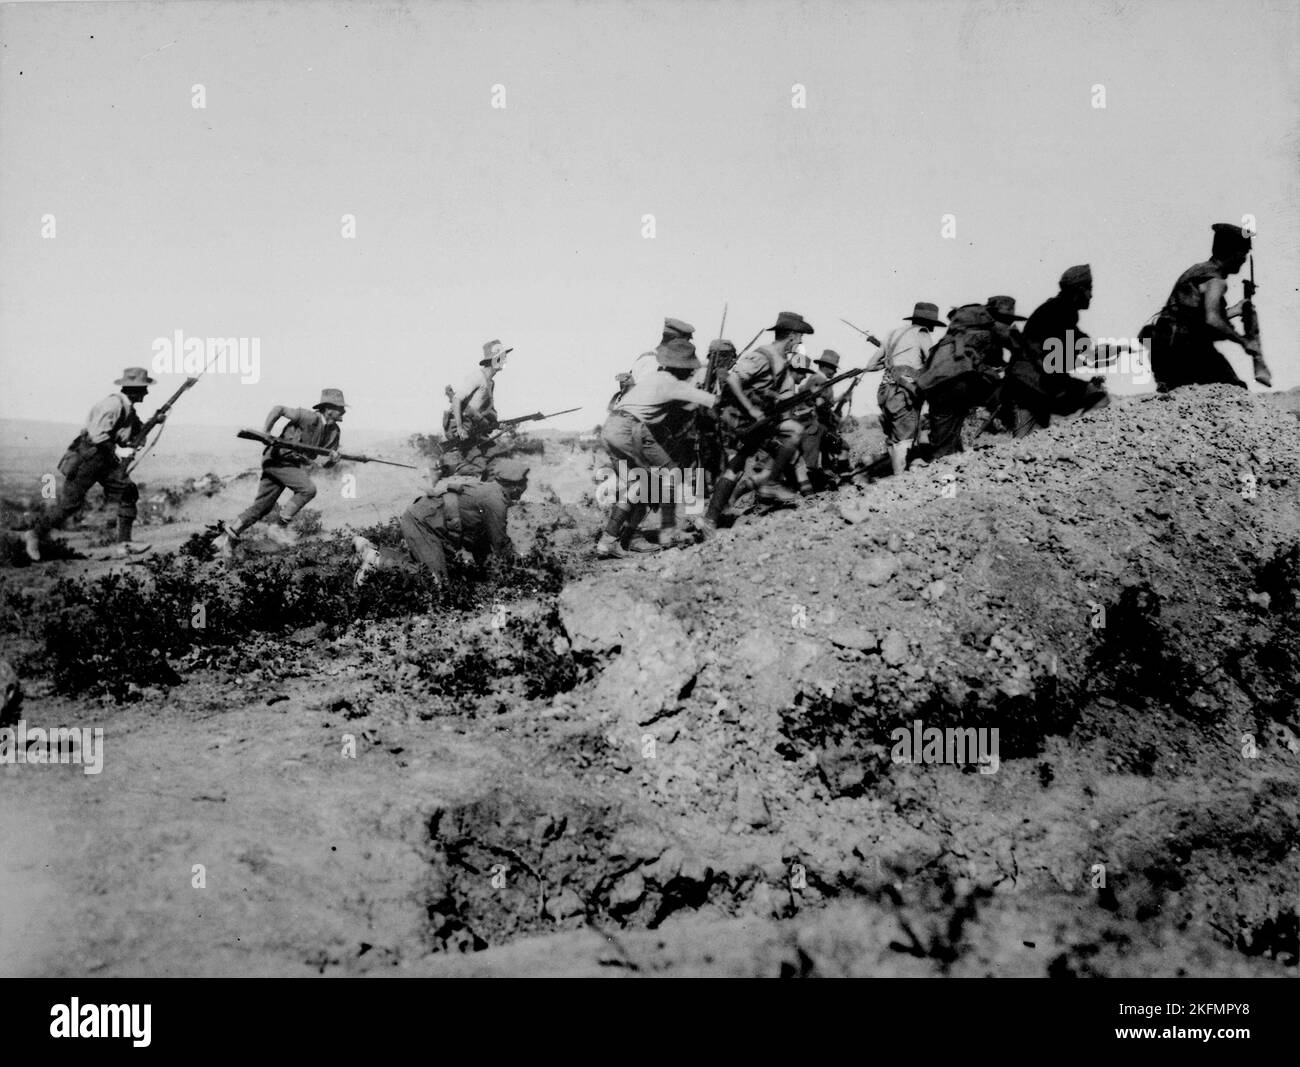 GALLIPOLI, TURKEY - circa 1918 - Scene just before the evacuation at Anzac. Australian troops charging near a Turkish trench. When they got there the Stock Photo